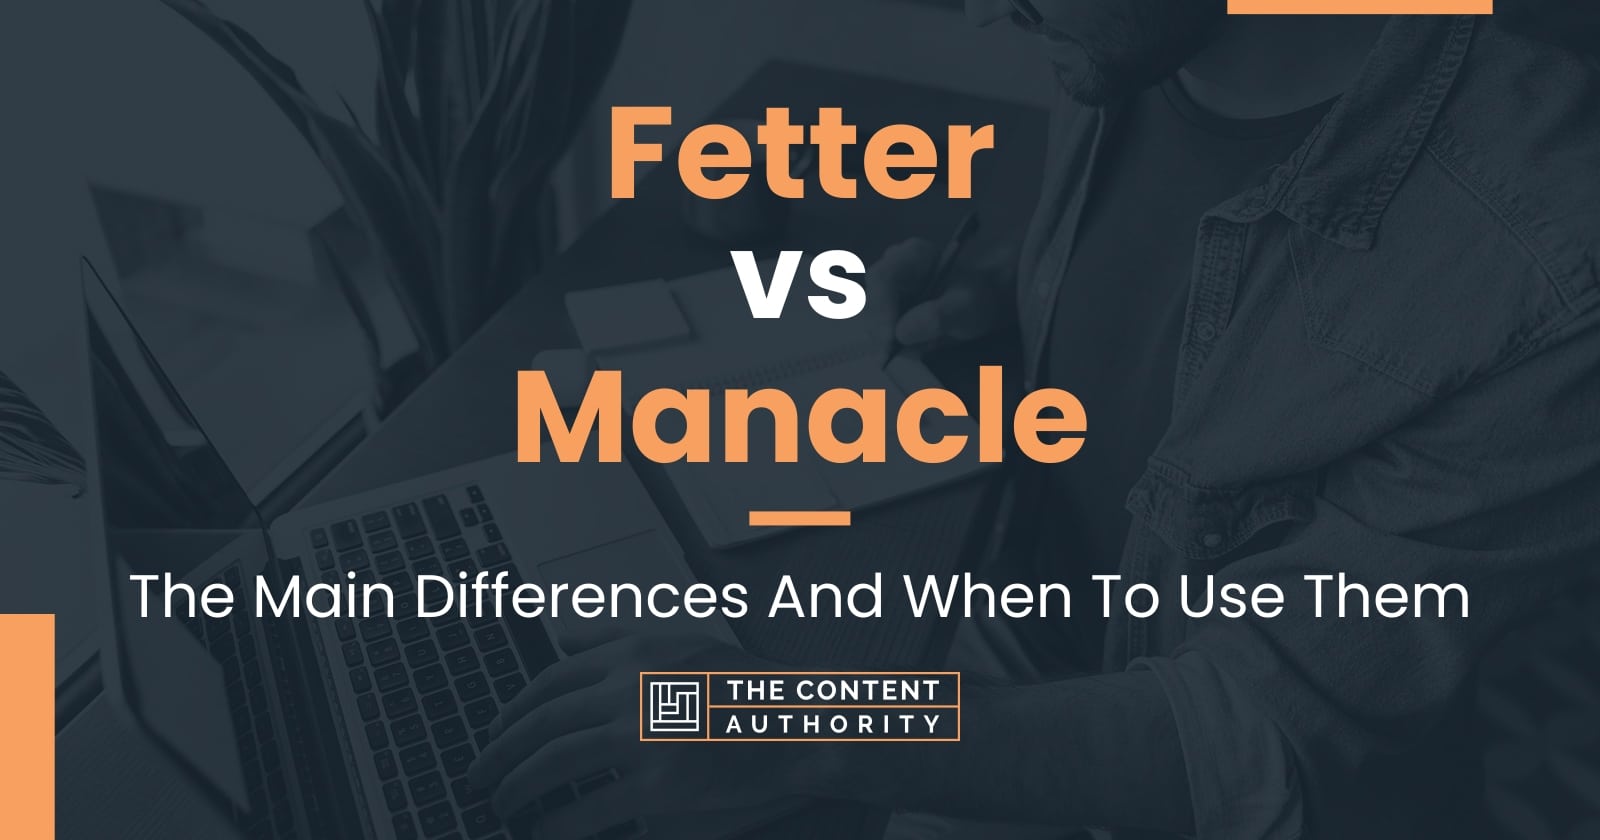 Fetter vs Manacle: The Main Differences And When To Use Them